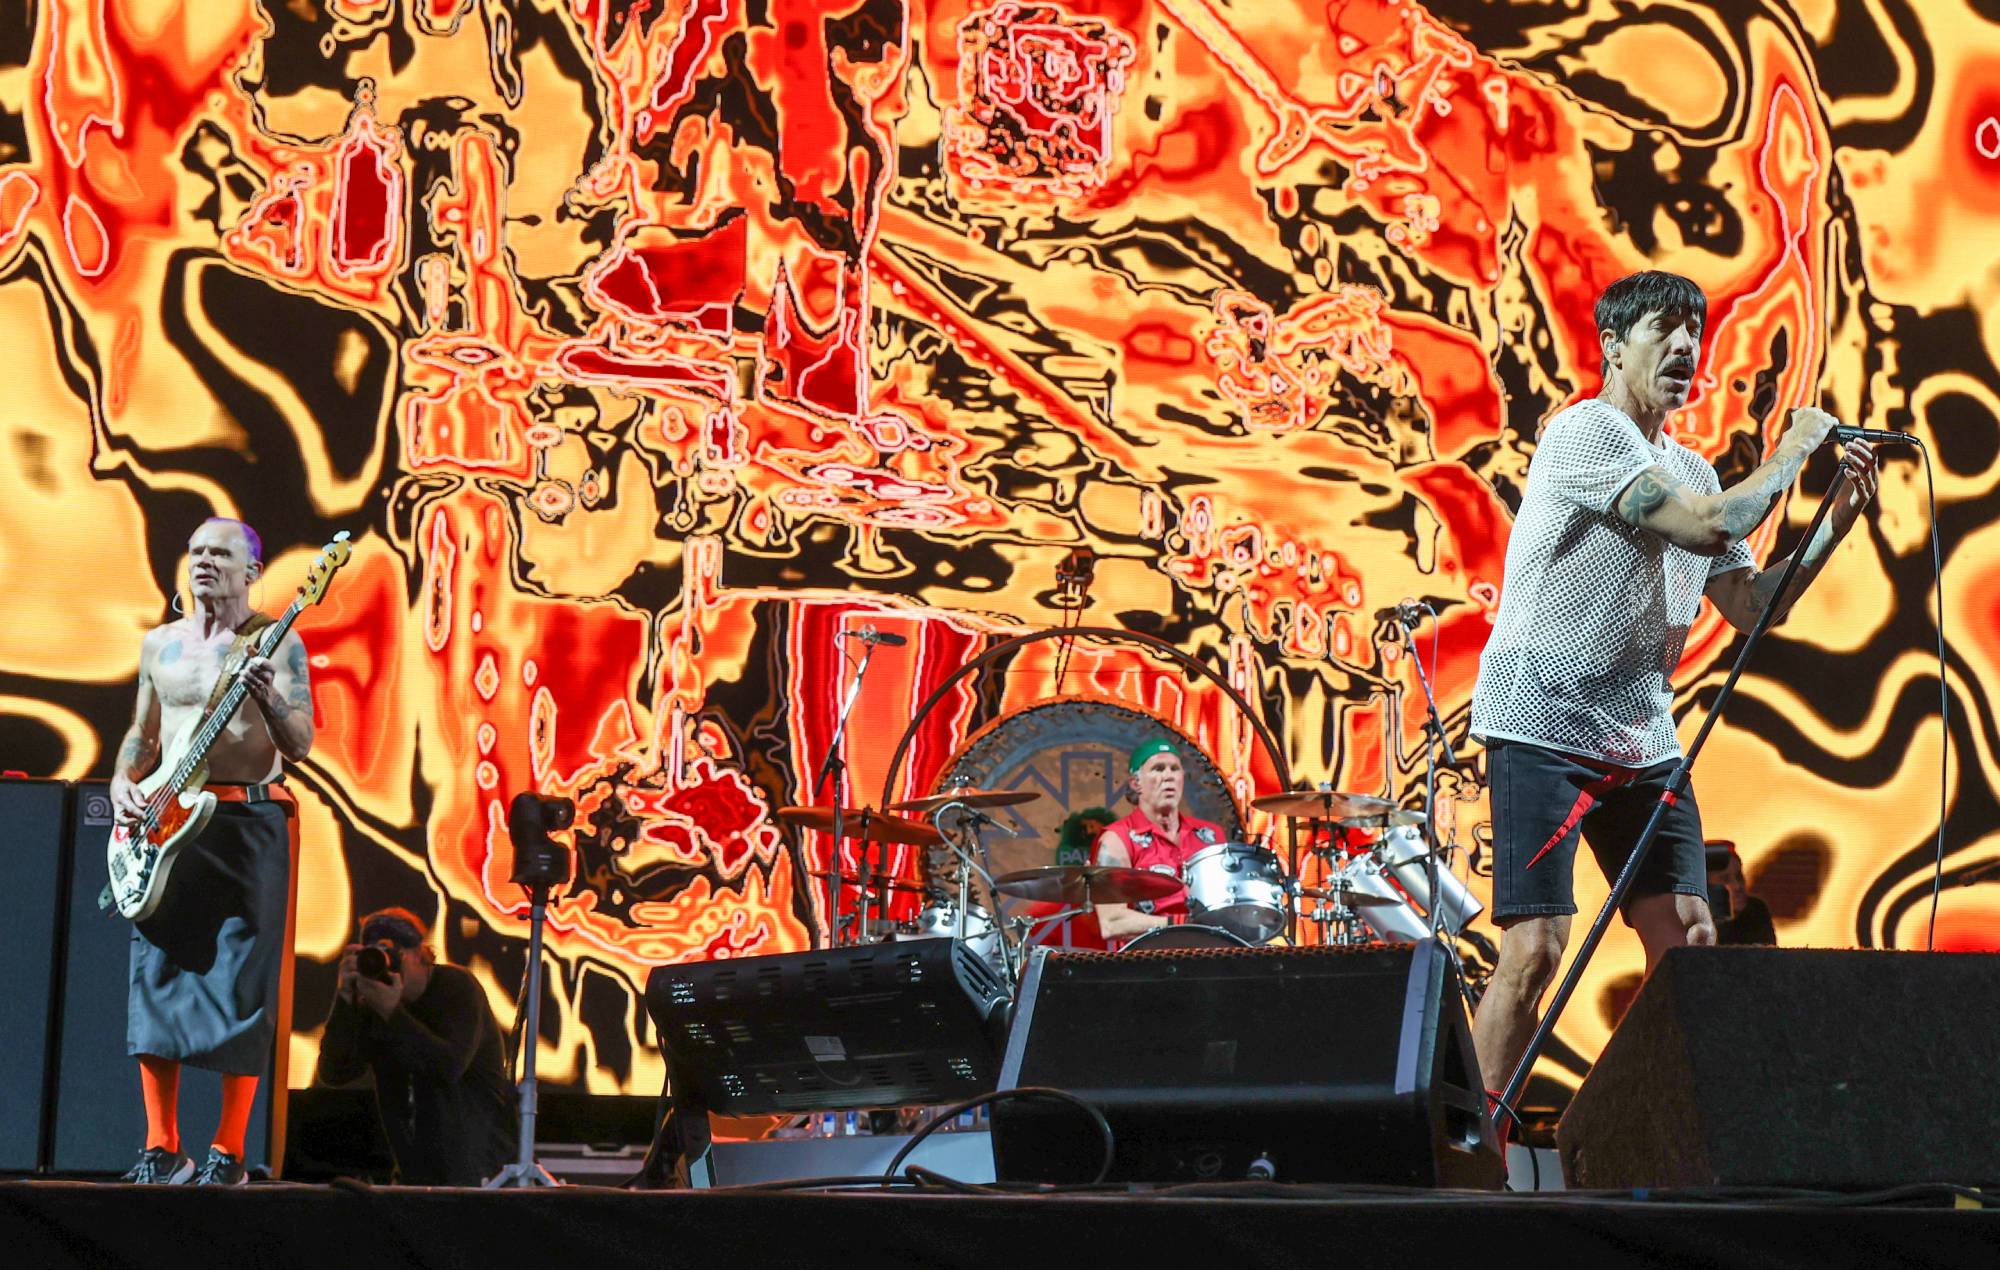 Flea, Chad Smith and Anthony Kiedis of Red Hot Chili Peppers perform at Mt Smart Stadium on January 21, 2023 in Auckland, New Zealand. Credit: Dave Simpson/GETTY